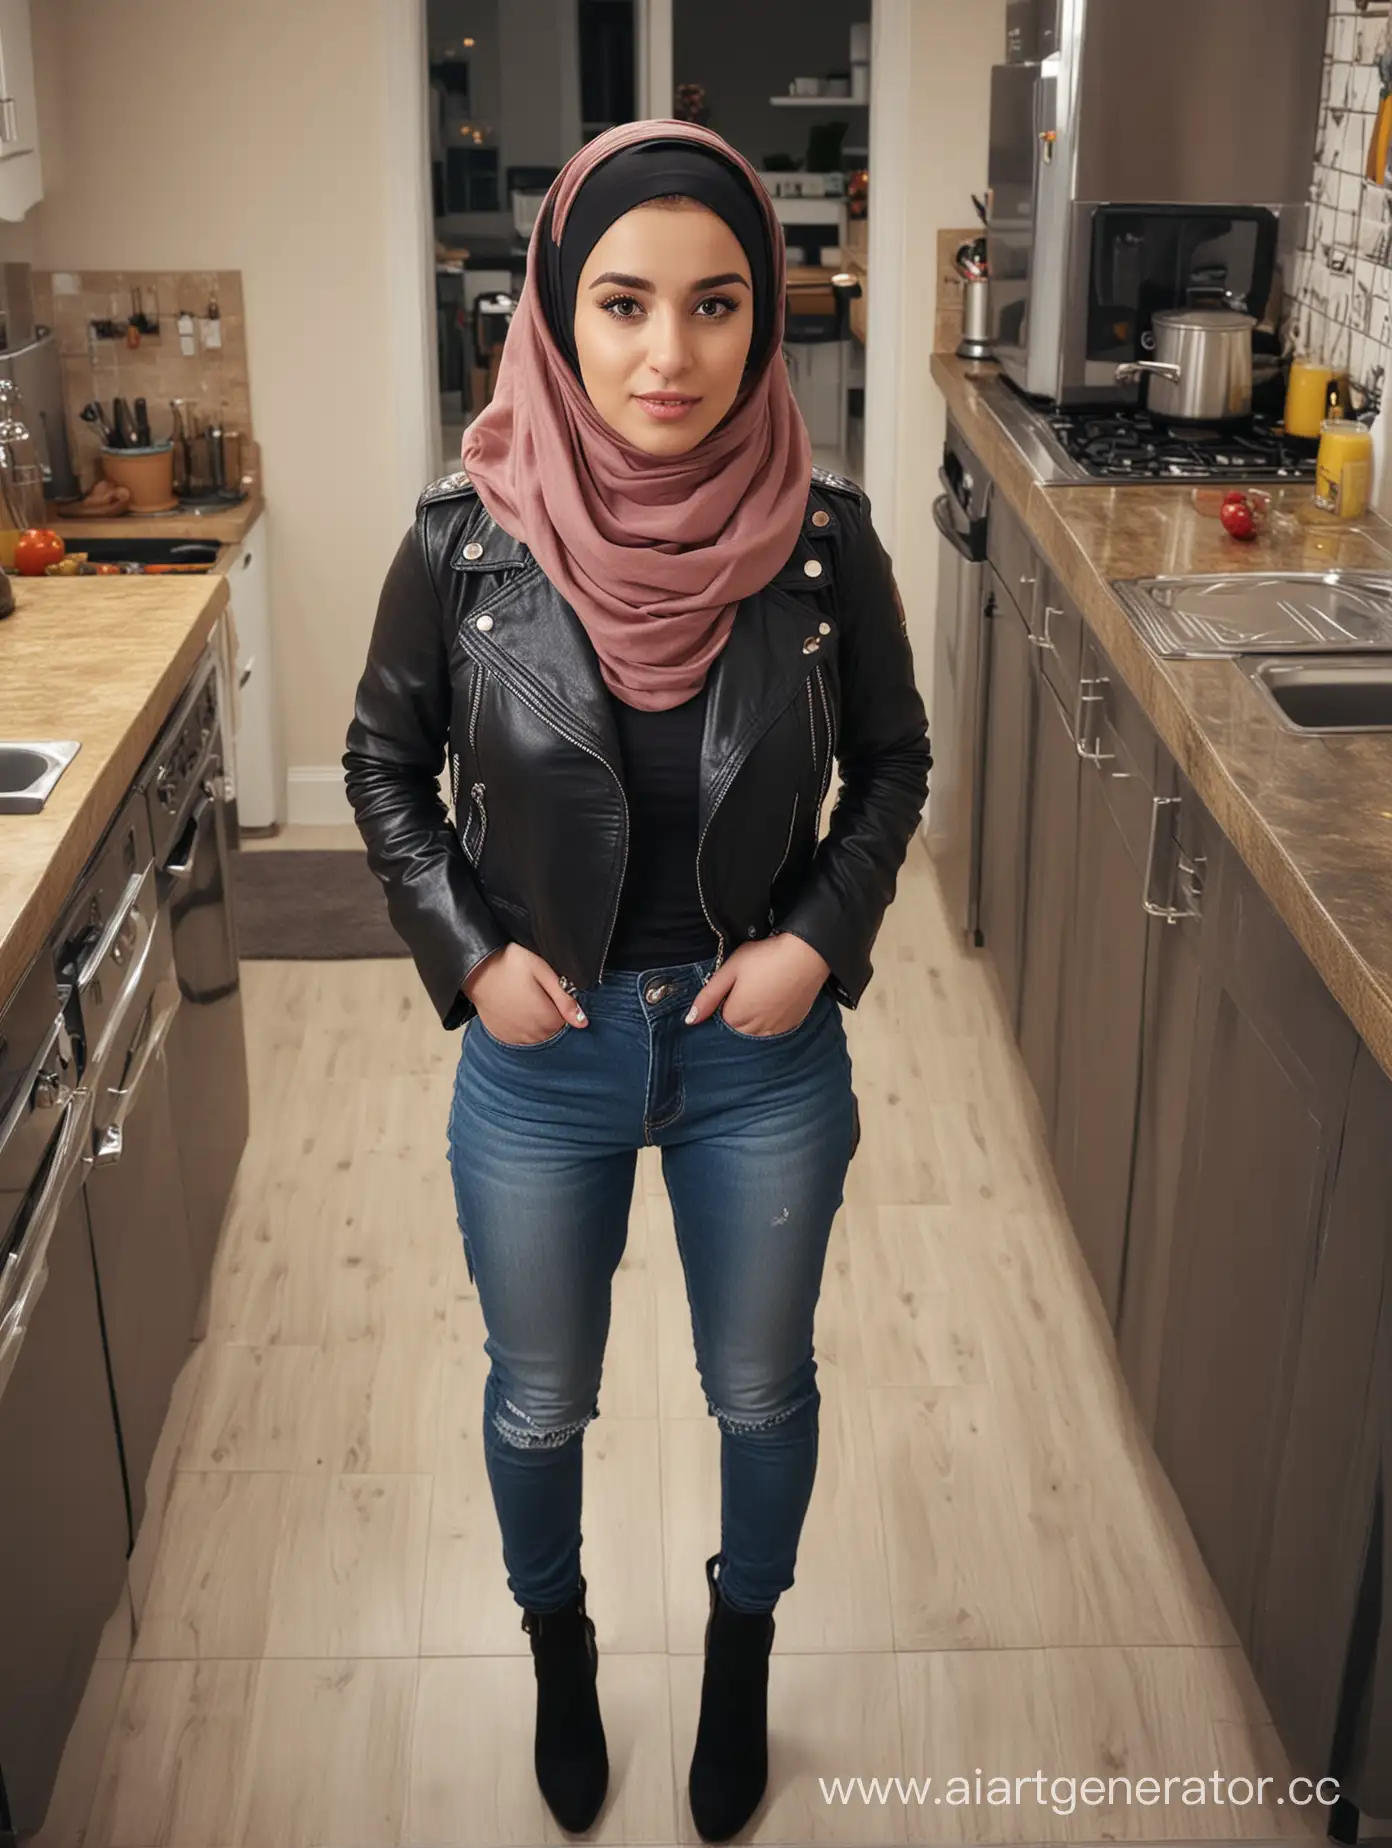 A dwarf girl. 25 years old. She wears a hijab, high waist skinny jeans, leathet jacket, knee high boots . Kitchen. Her height is 130cm. Close pov shot. Close up. From above. 8k sharp. British. Pretty face.